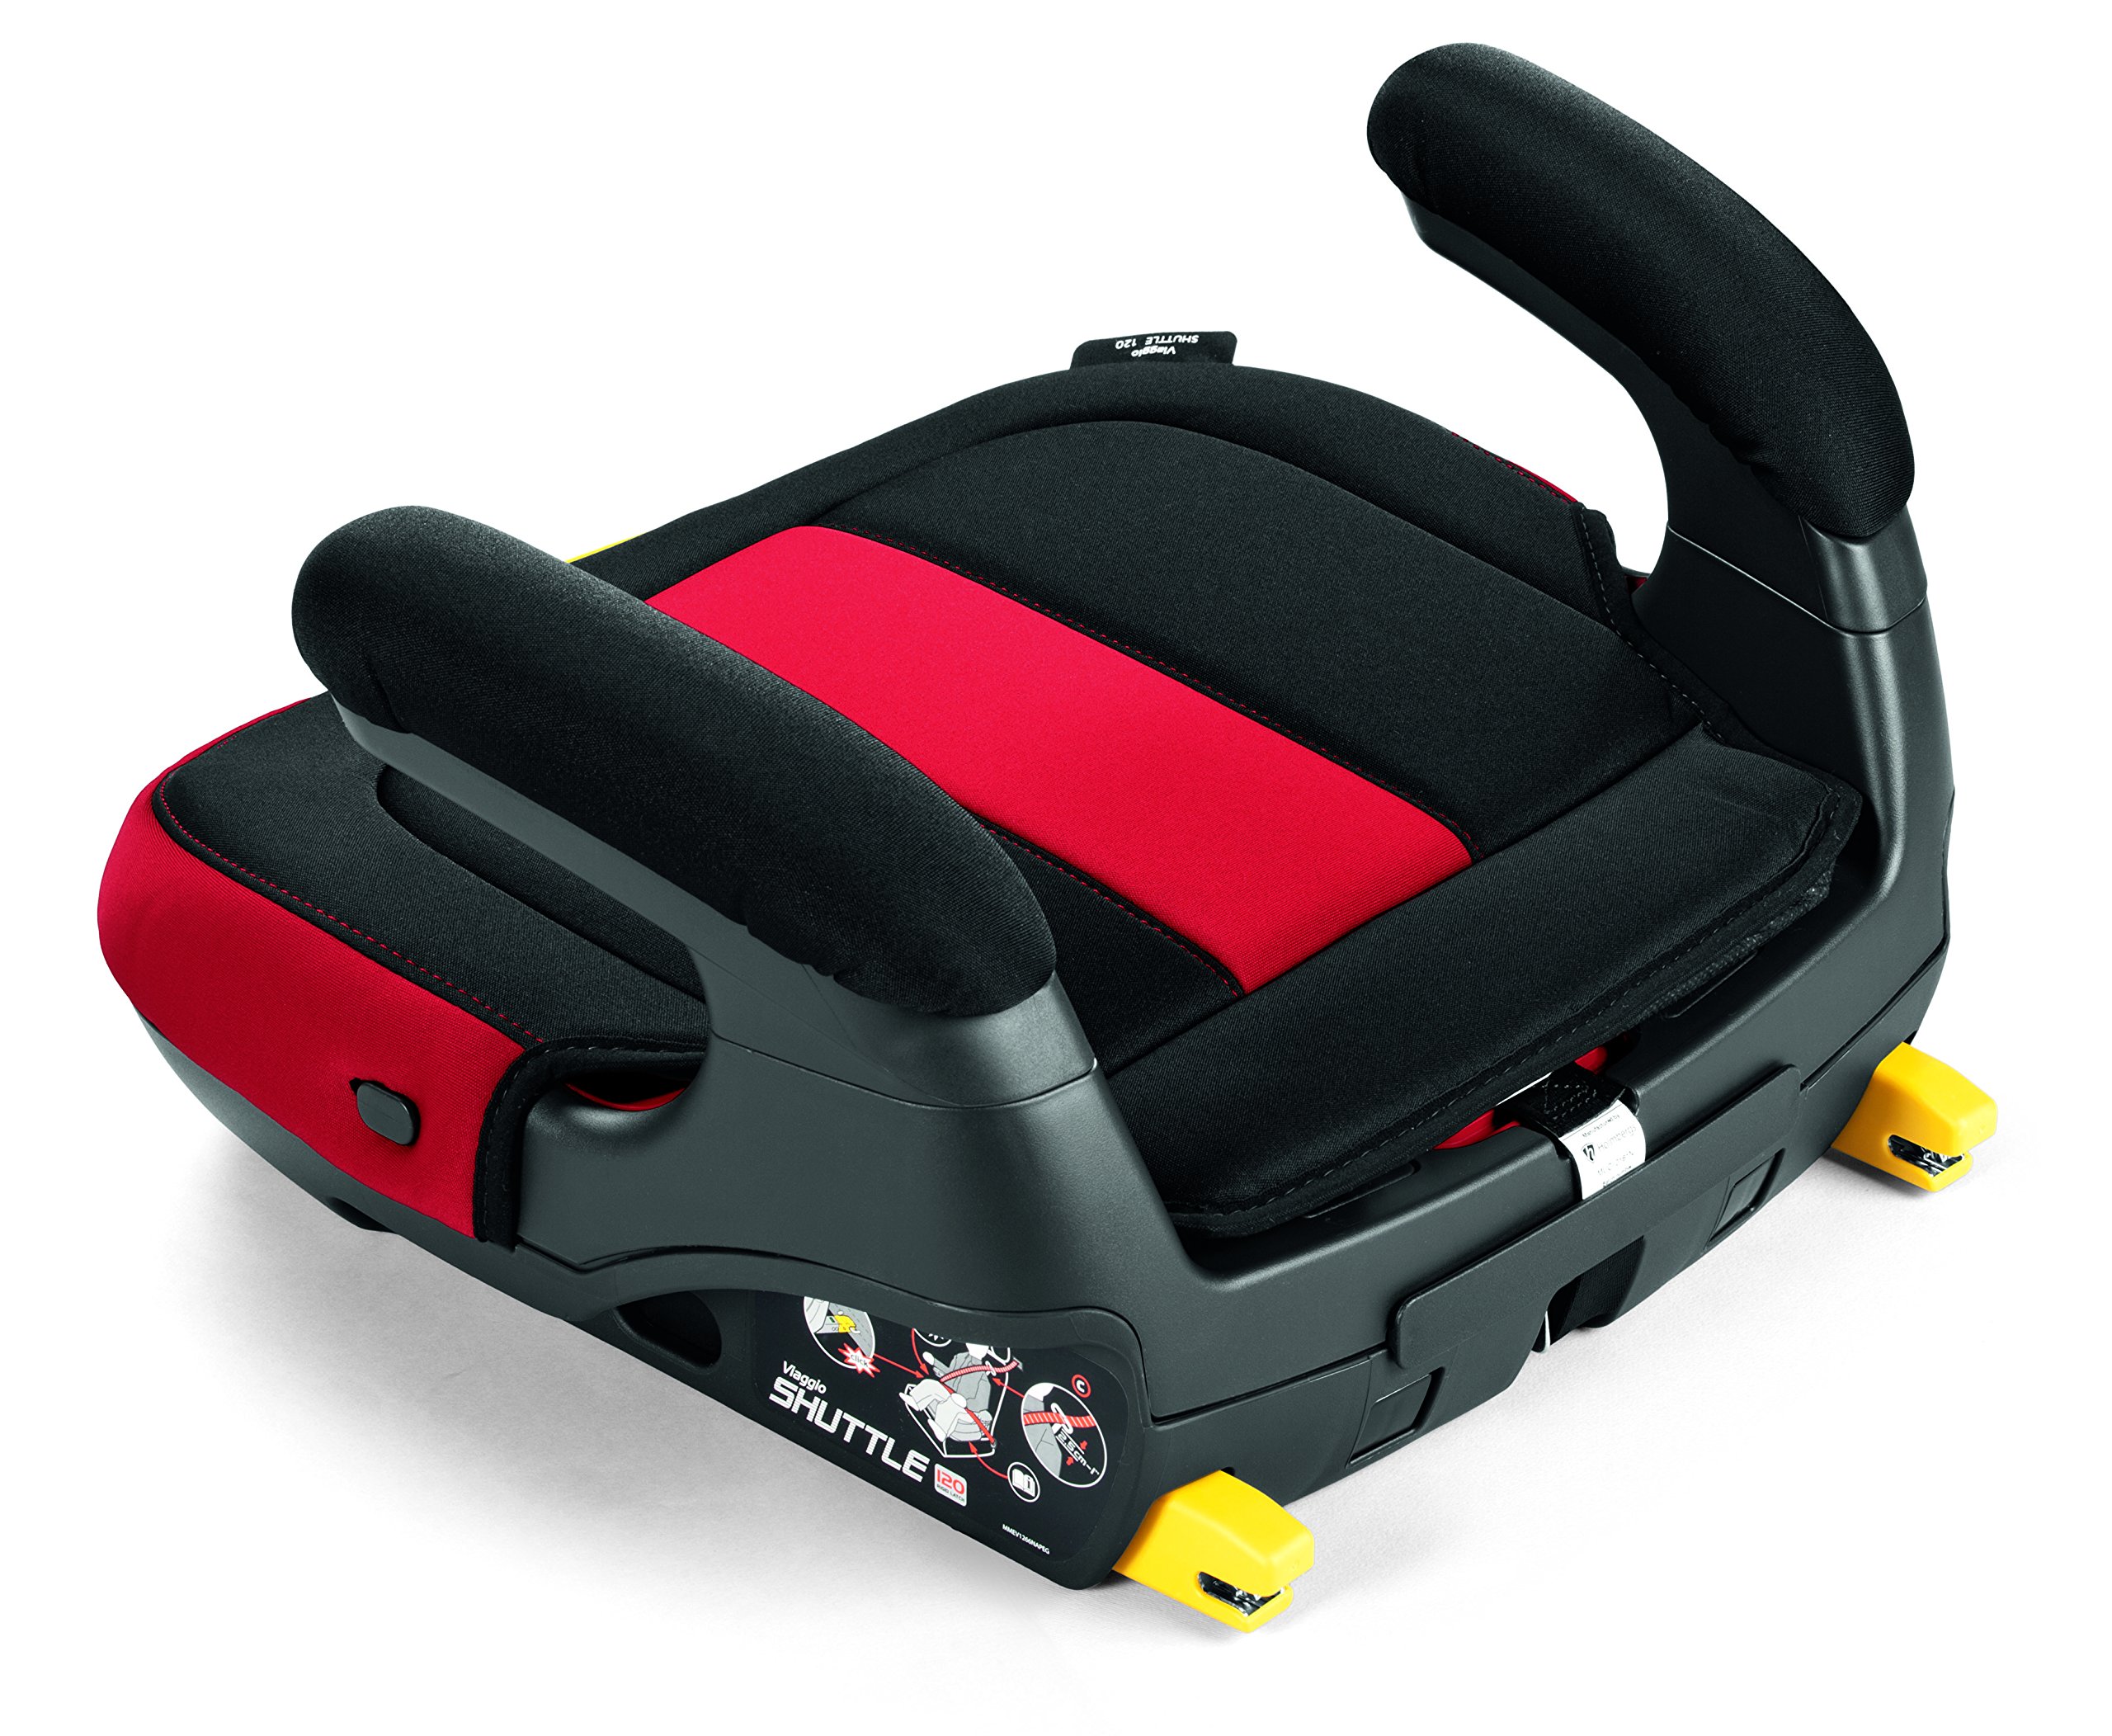 Peg Perego Viaggio Shuttle - Booster Car Seat - for Children from 40 to 120 lbs - Made in Italy - Monza (Black & Red)